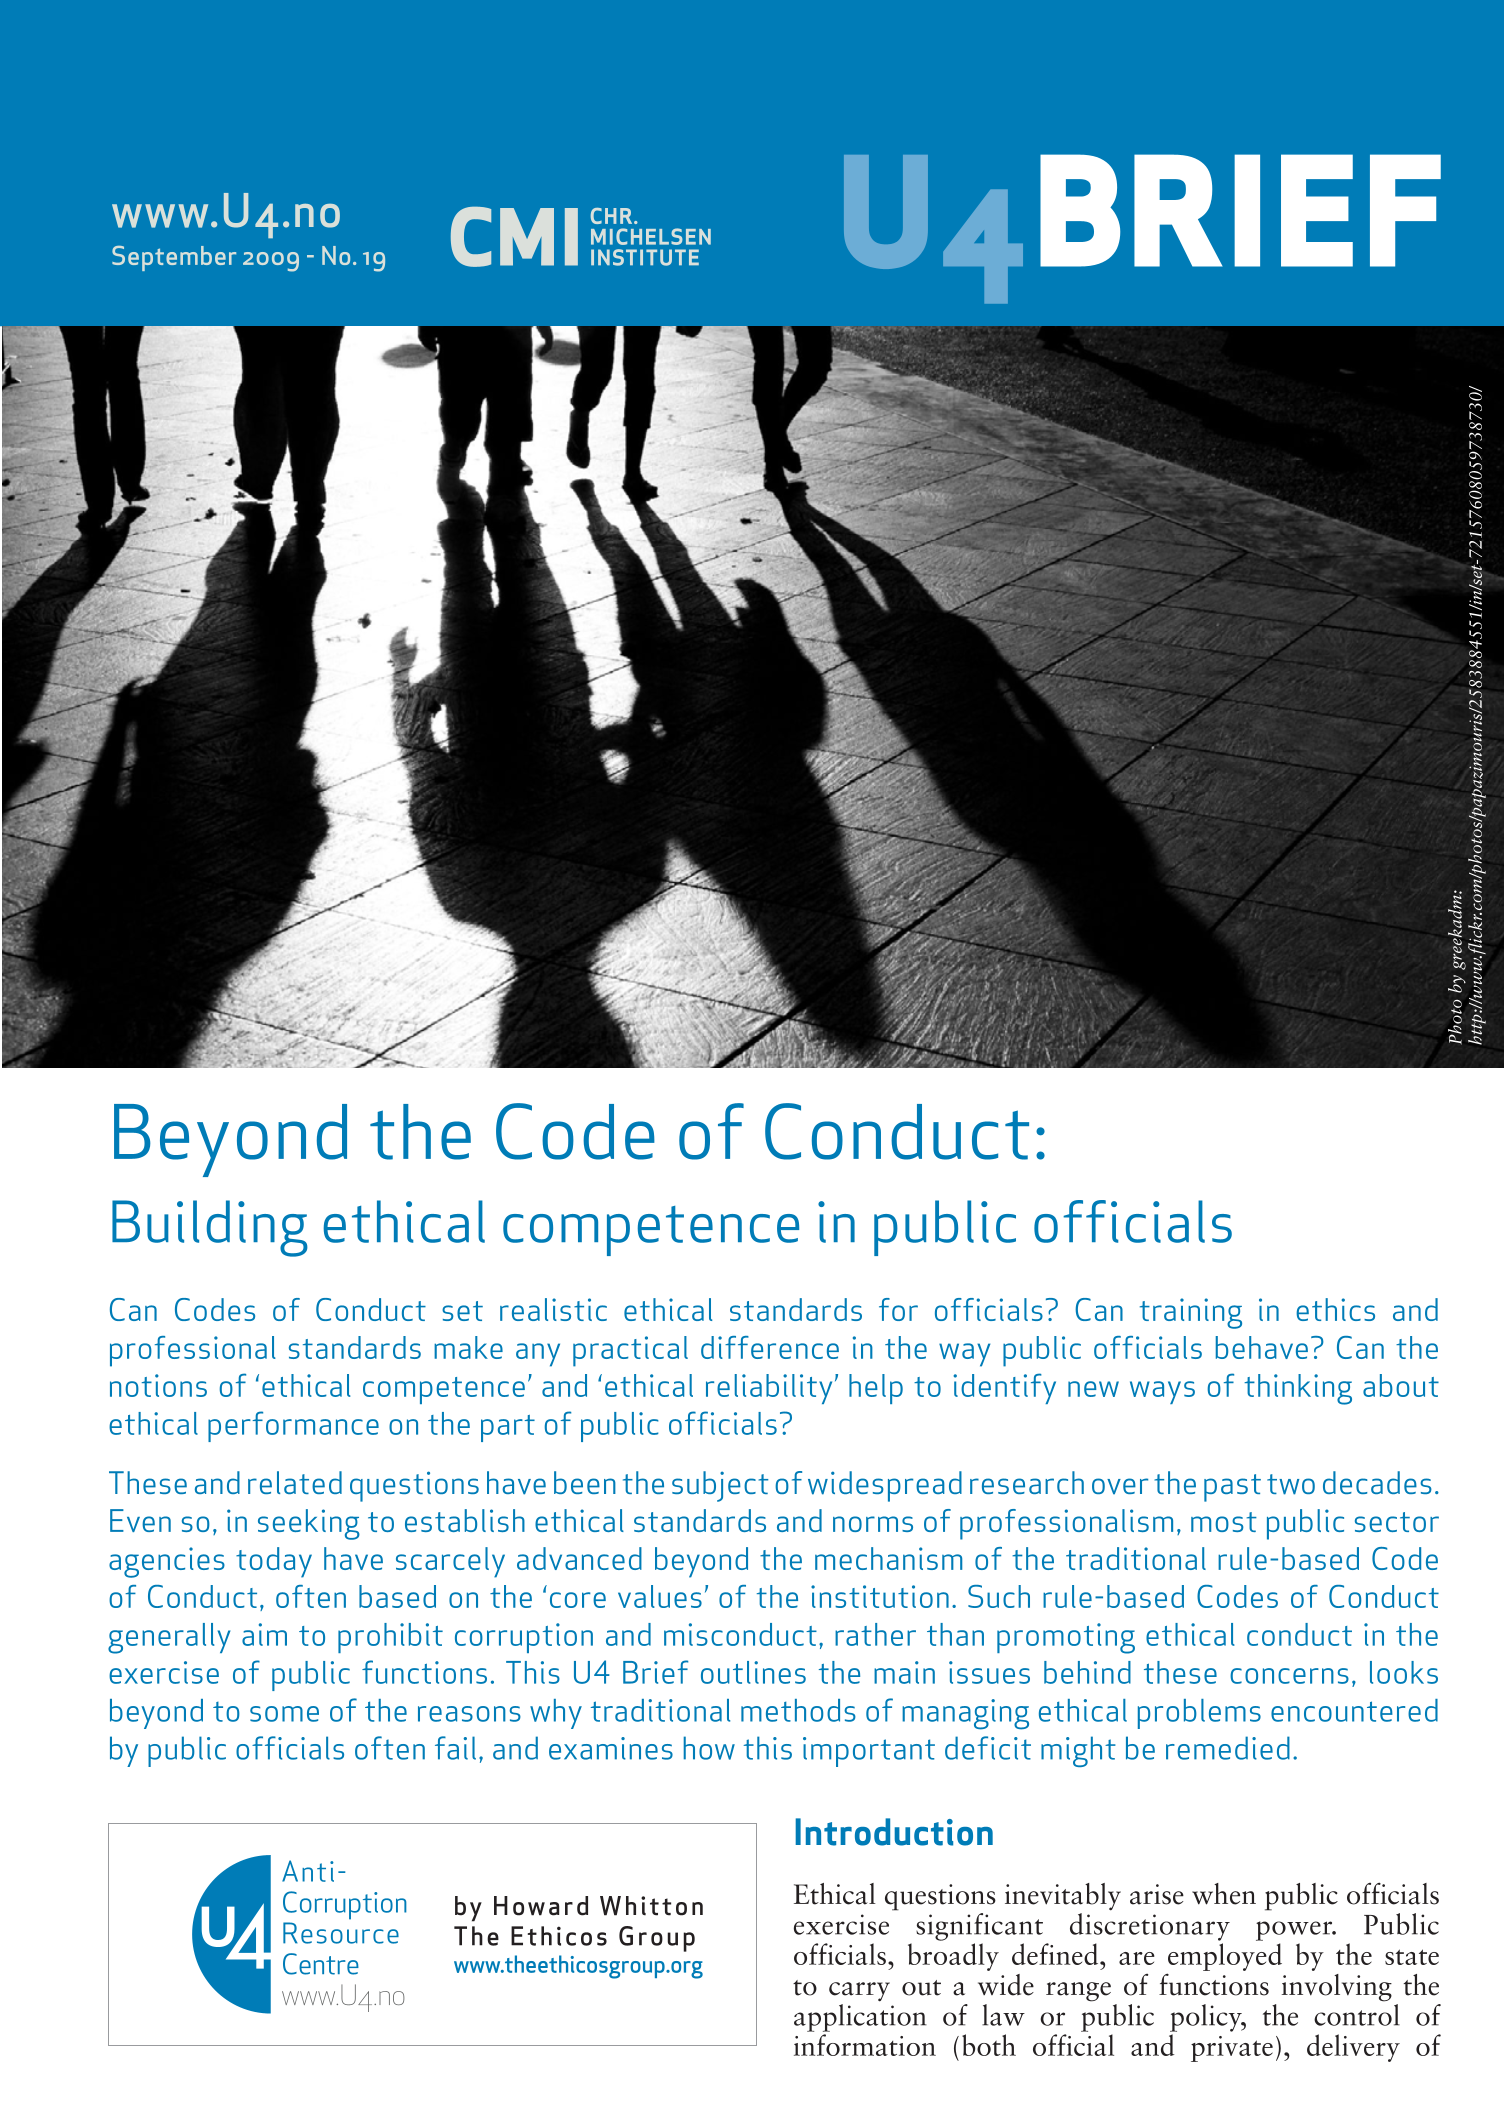 Beyond the code of conduct: Building ethical competence in public officials